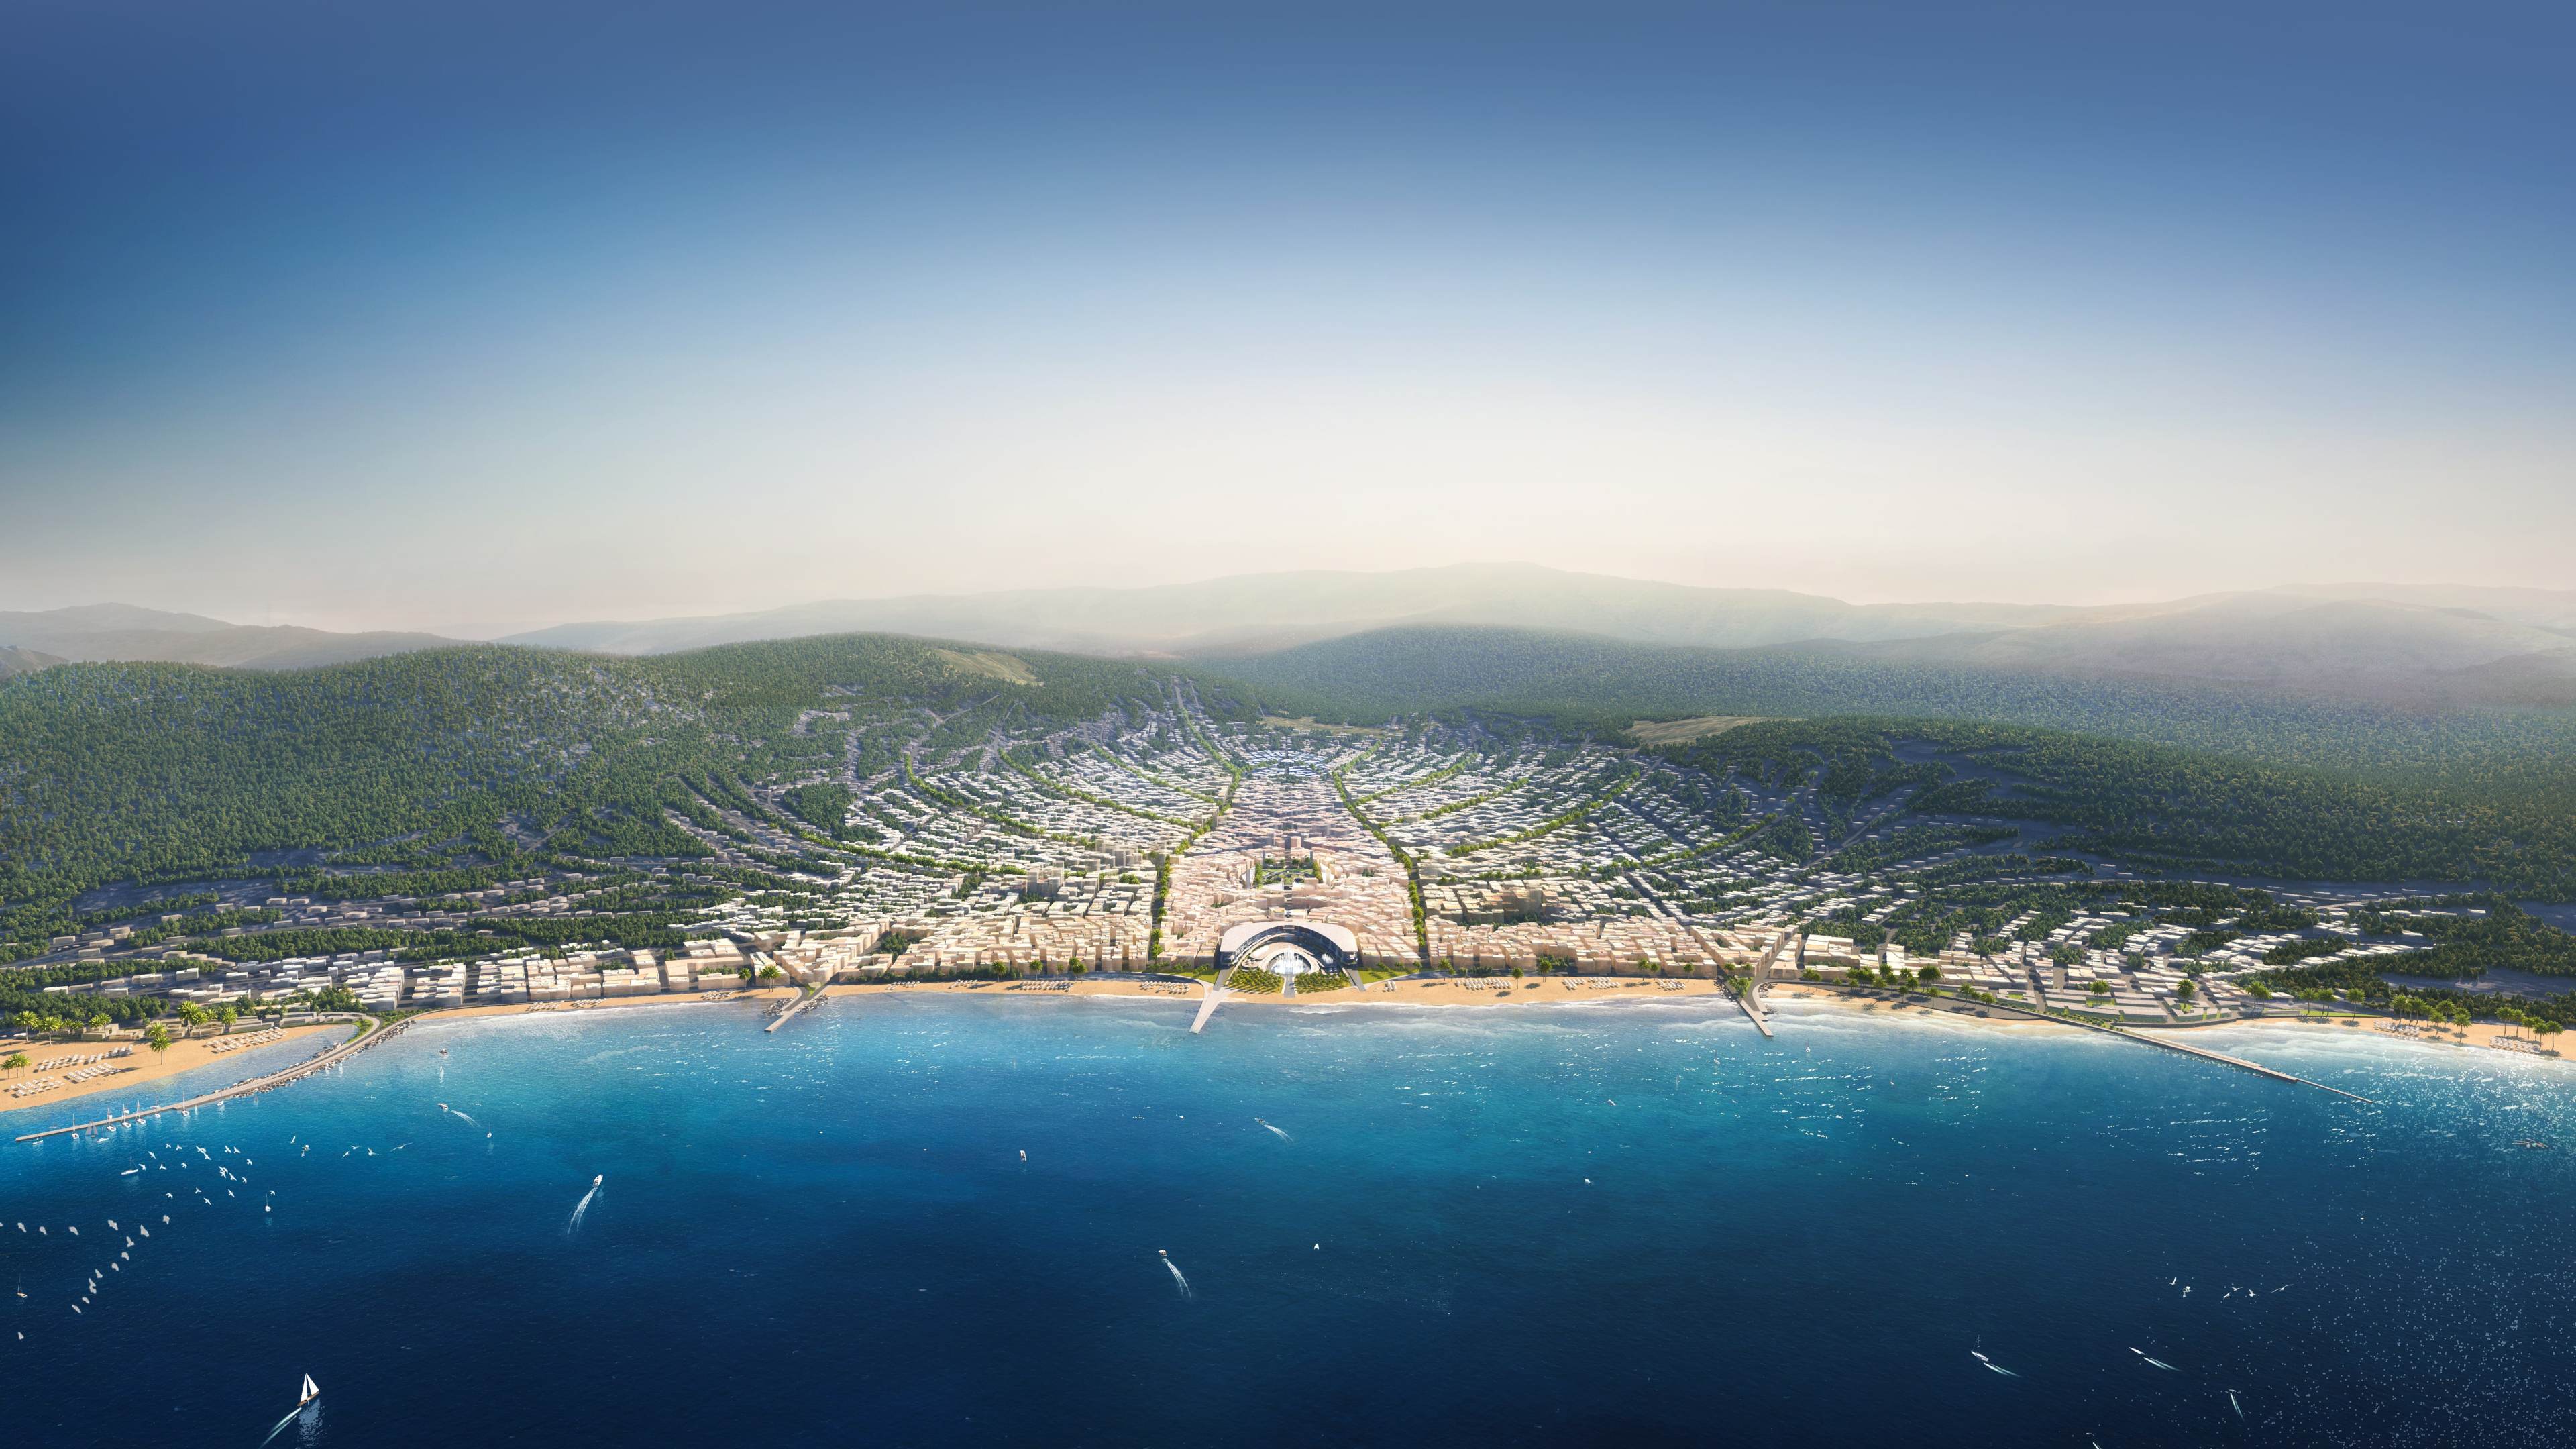 A rendering of the planned city on the Mediterranean.